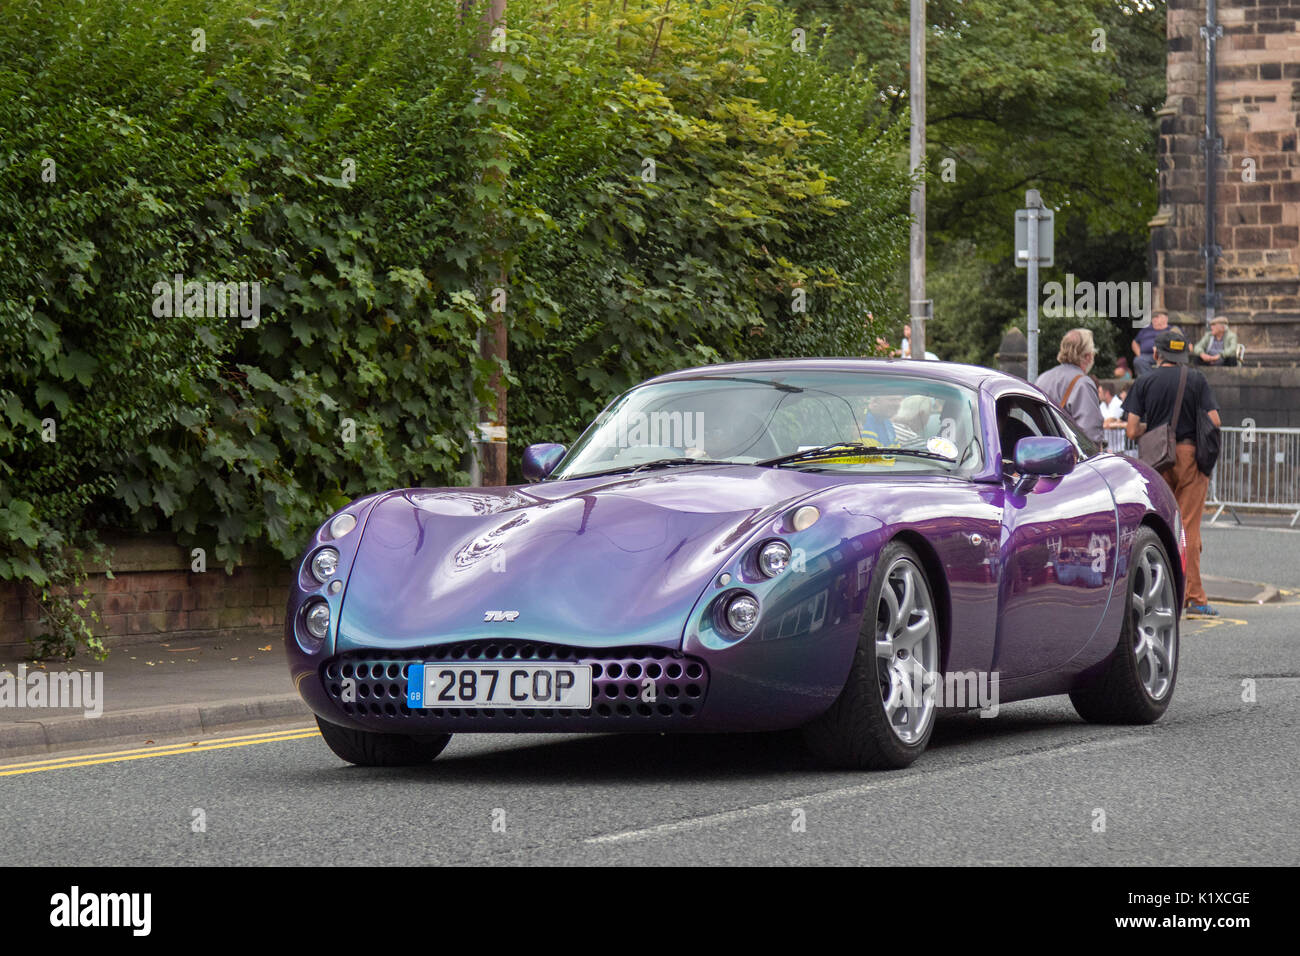 2000 TVR Tuscan at the 2017 Ormskirk MotorFest 300 vintage, classic cars from all eras of motoring lined up on town centre streets and in Coronation Park for people to admire. Stock Photo